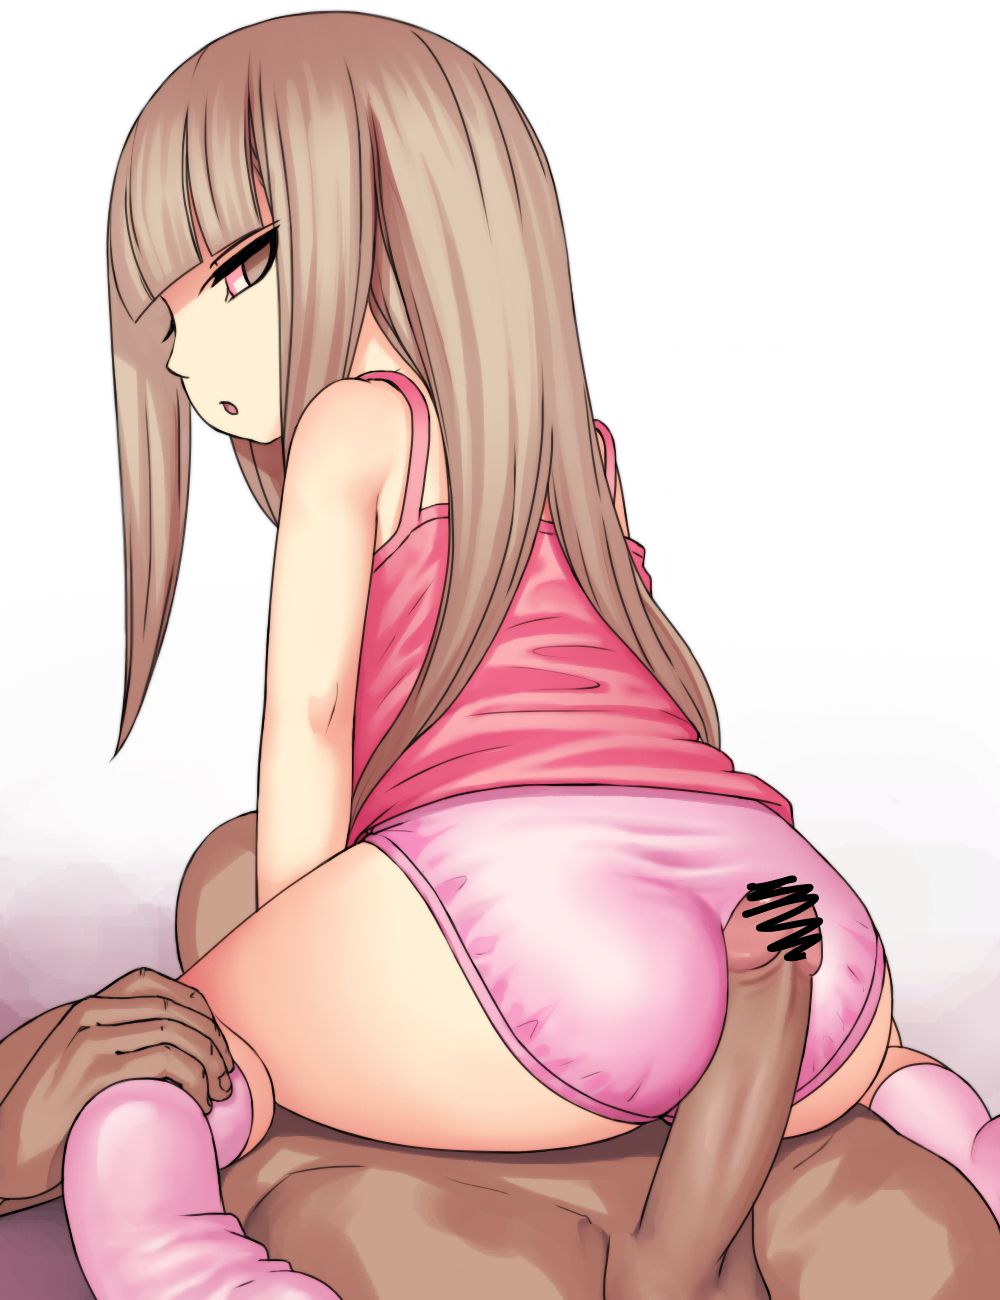 [Loli ass job] Secondary loli ass job secondary erotic image that is safe even at an age that cannot be inserted to rub the dick against the ass of a secondary loli girl 1